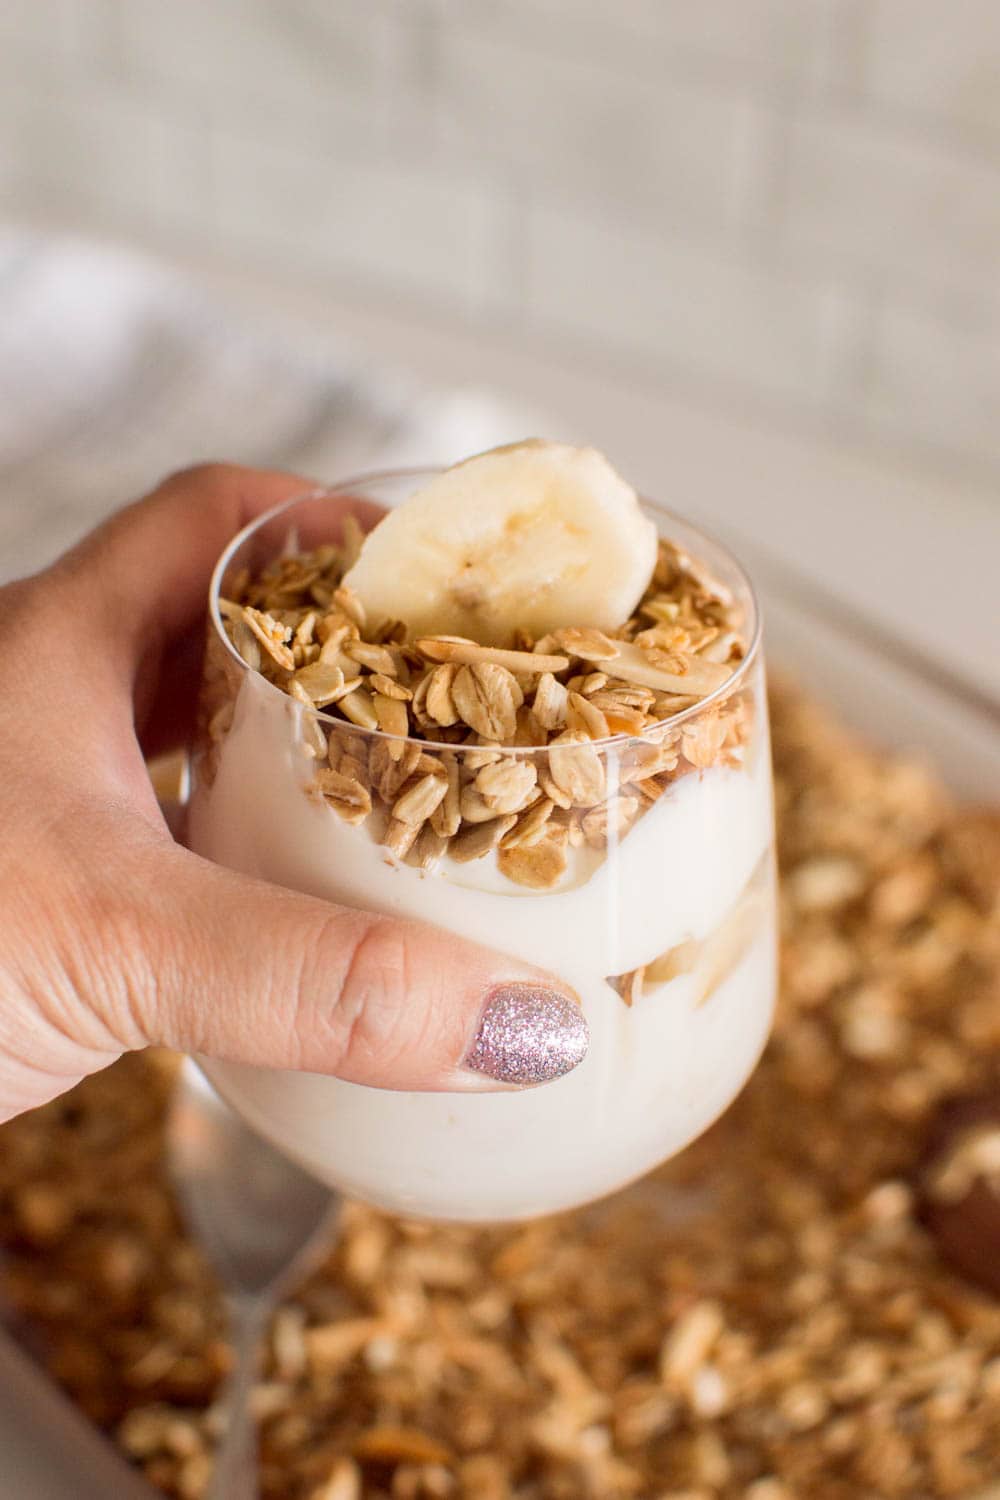 A hand holding a serving of yogurt and banana with homemade granola on top